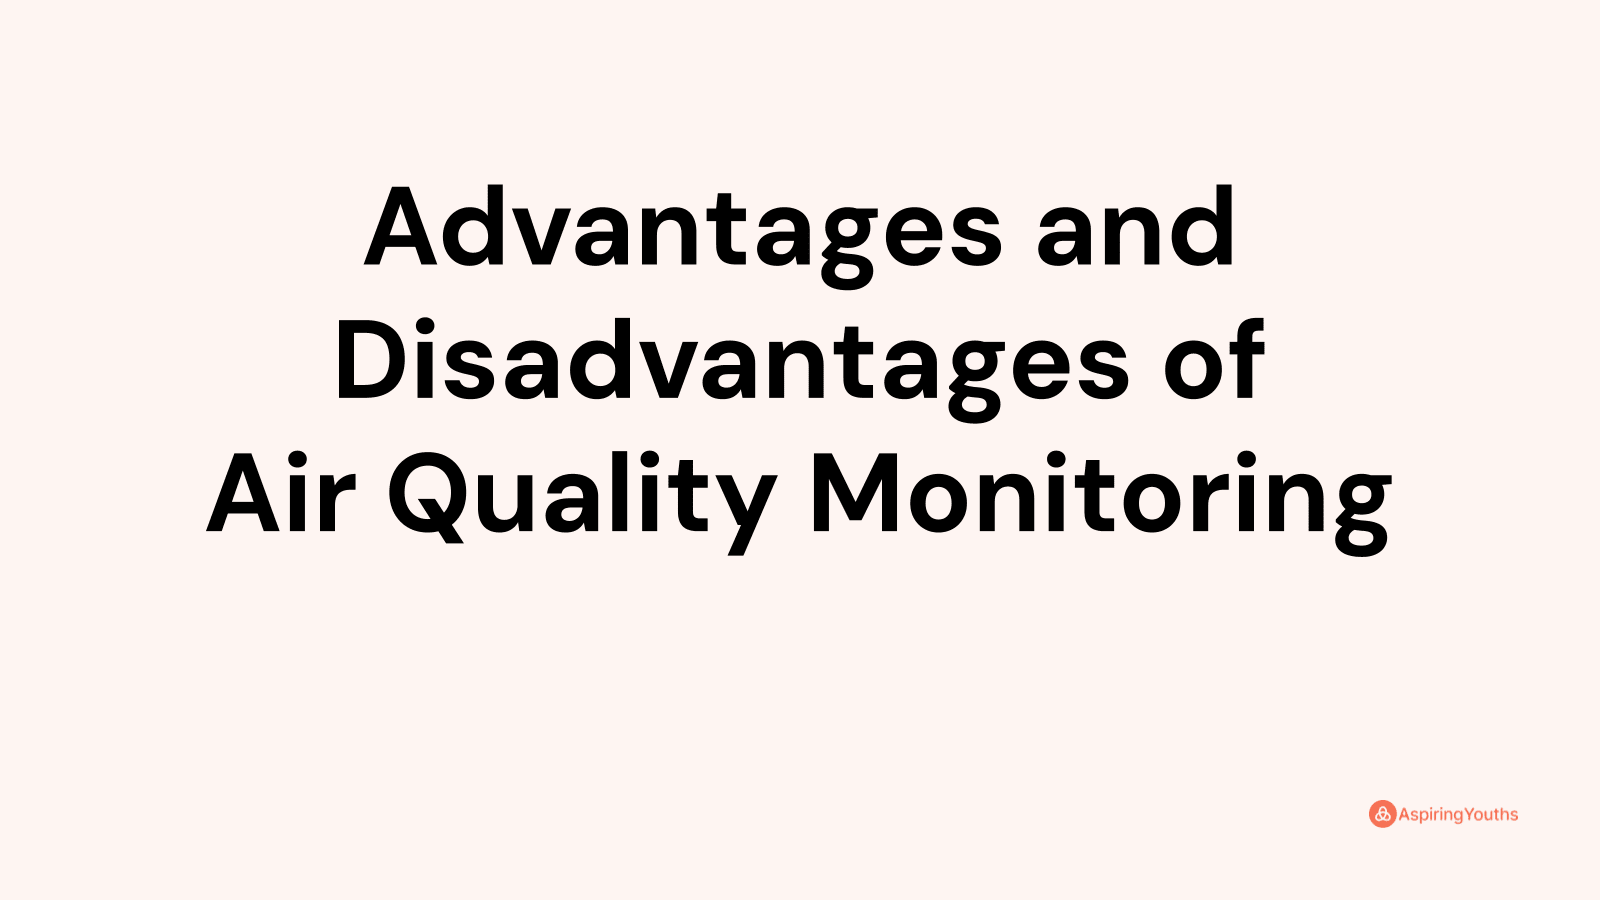 Advantages and disadvantages of Air Quality Monitoring